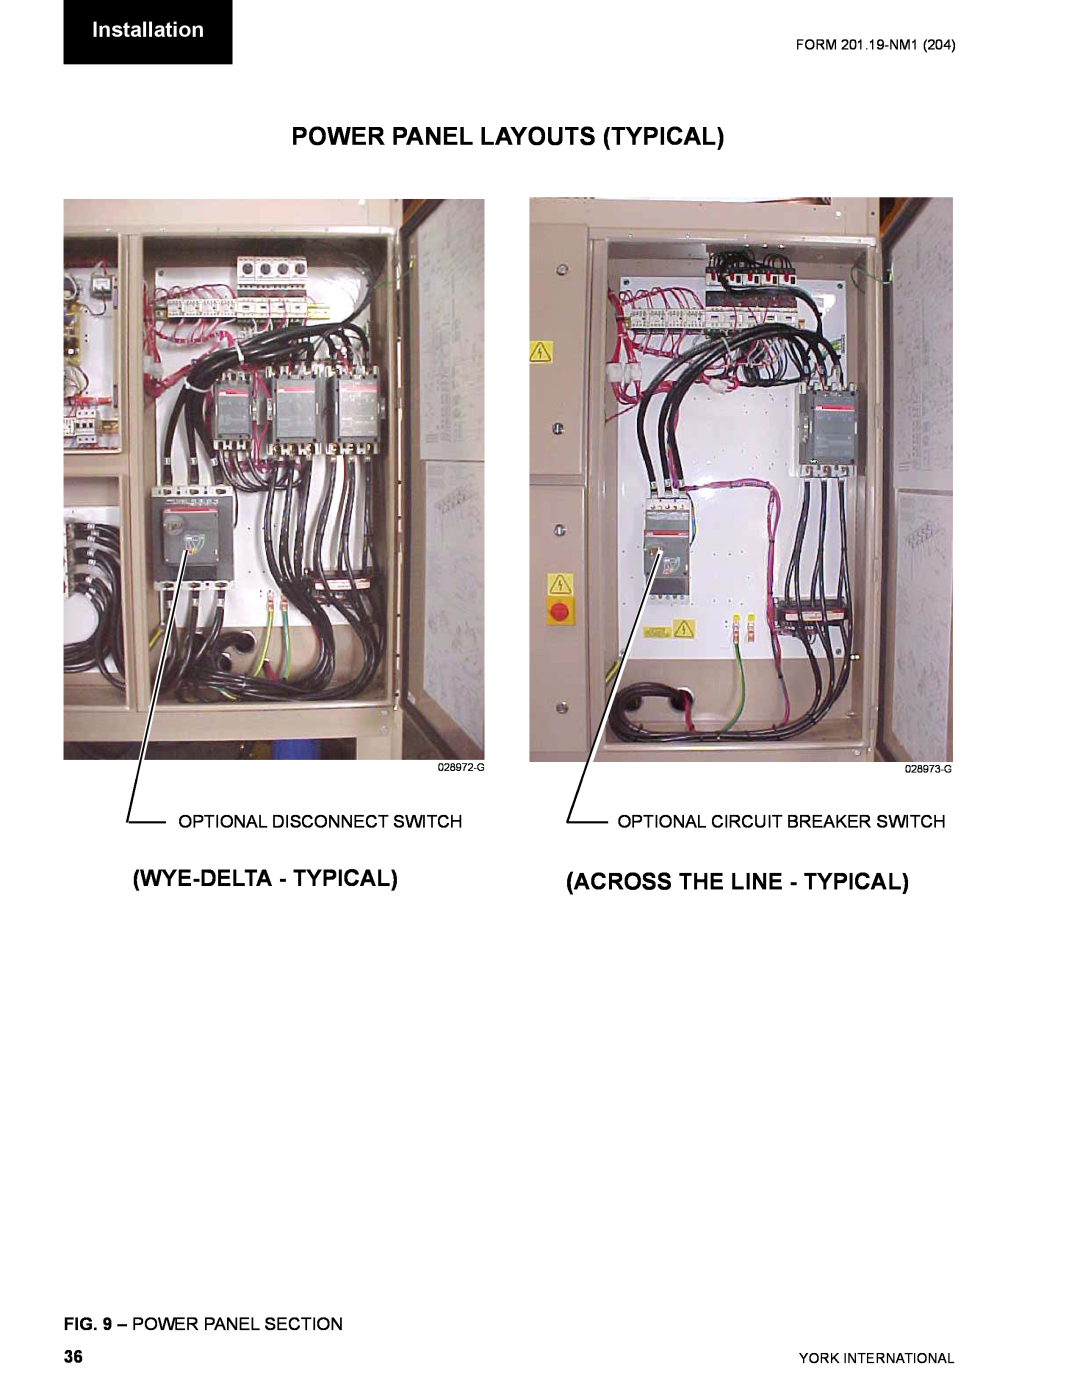 York YCAS0130 manual Power Panel Layouts Typical, Wye-Delta - Typical, Across The Line - Typical, Installation 